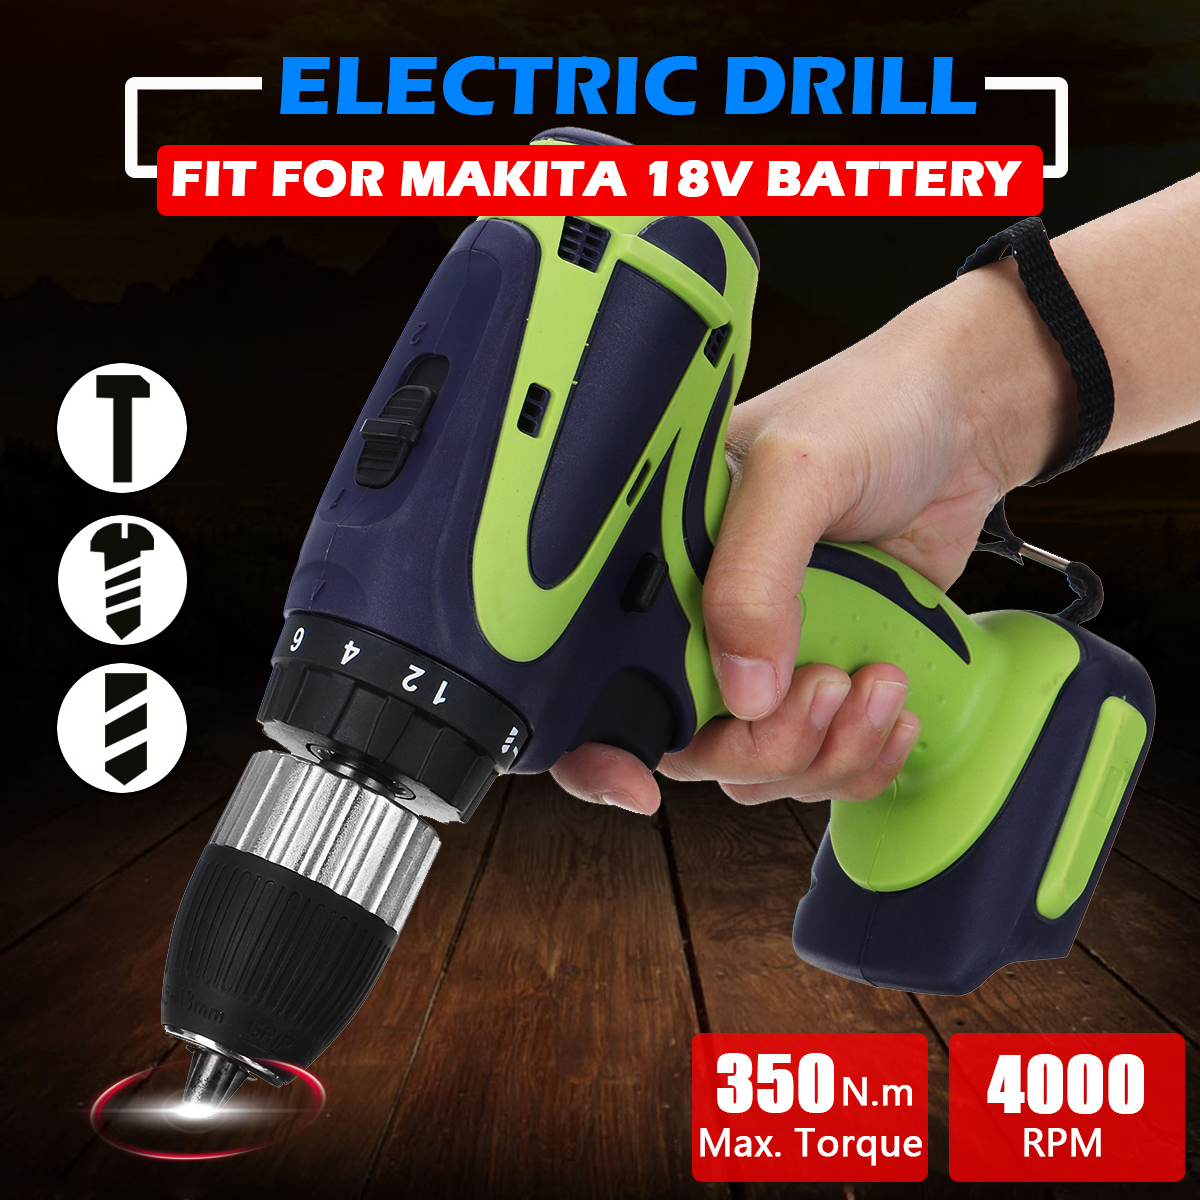 13mm-Chuck-Cordless-Electric-Drill-For-Makita-18V-Battery-4000RPM-LED-Light-Power-Drills-350Nm-1642844-3